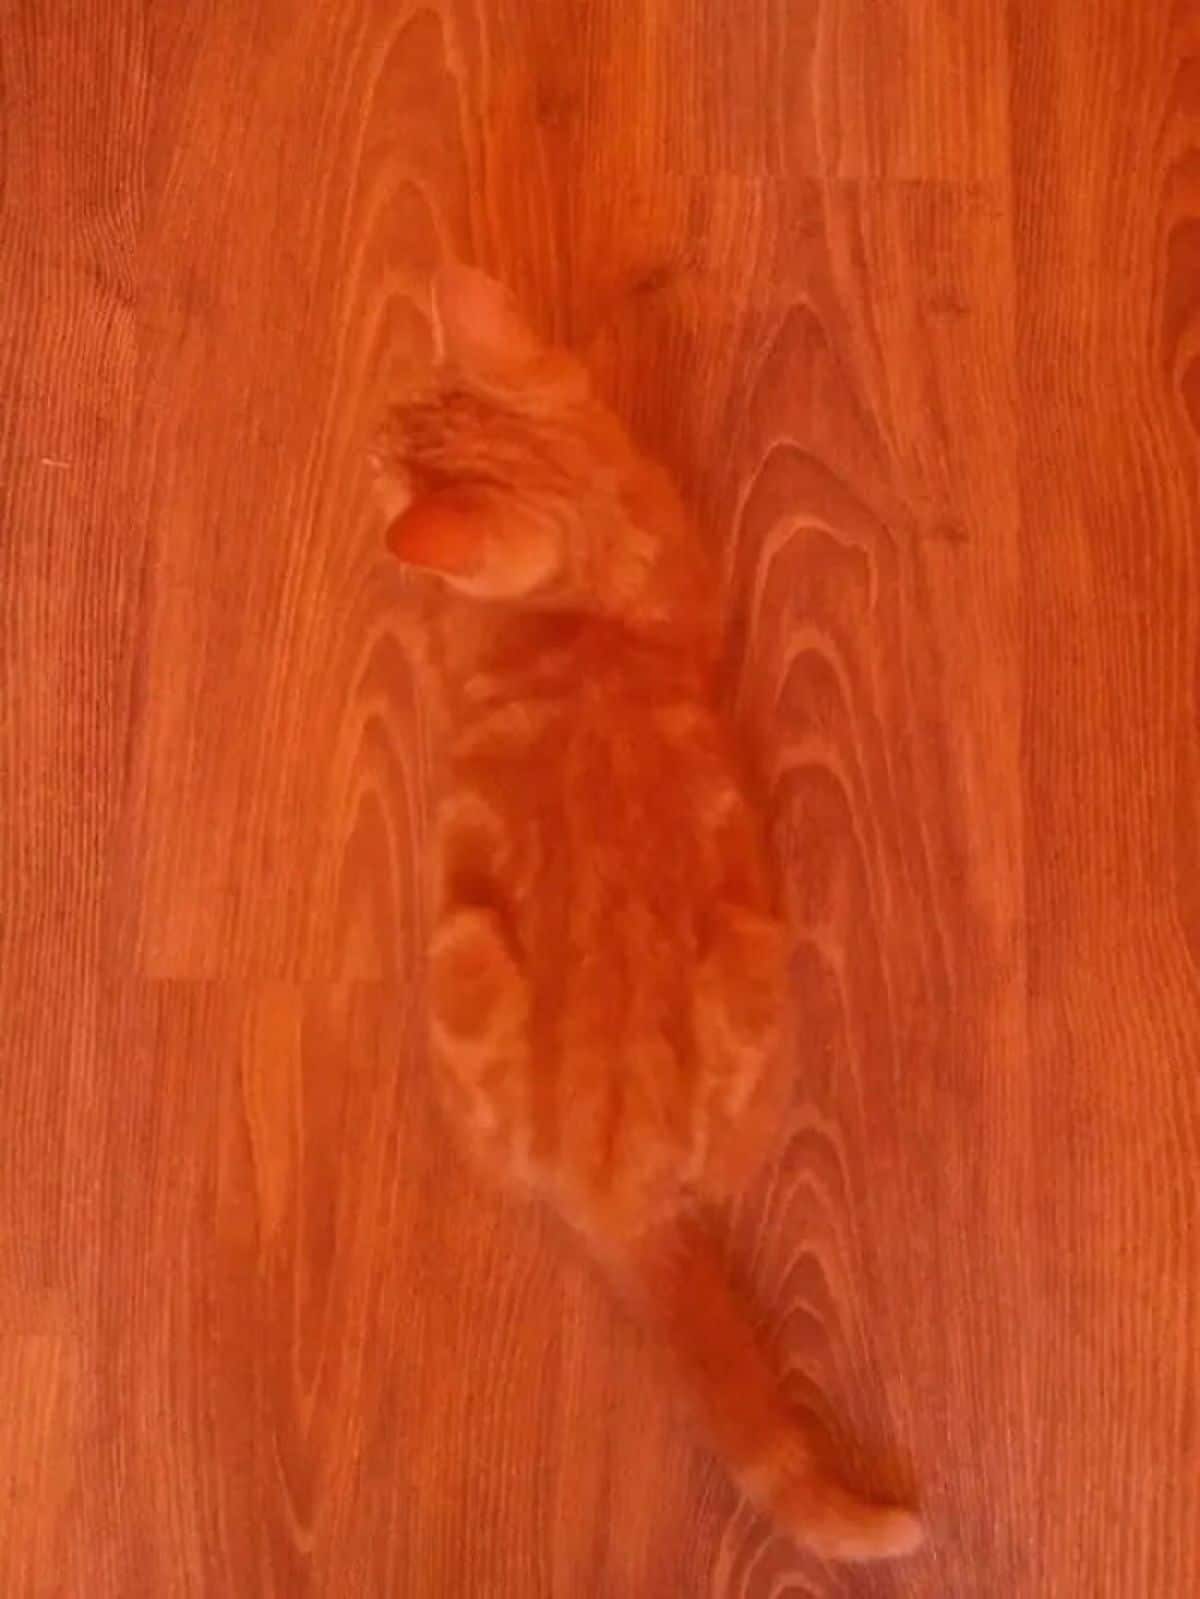 orange marbled cat laying on a marbled wooden floor of the same colour as the cat